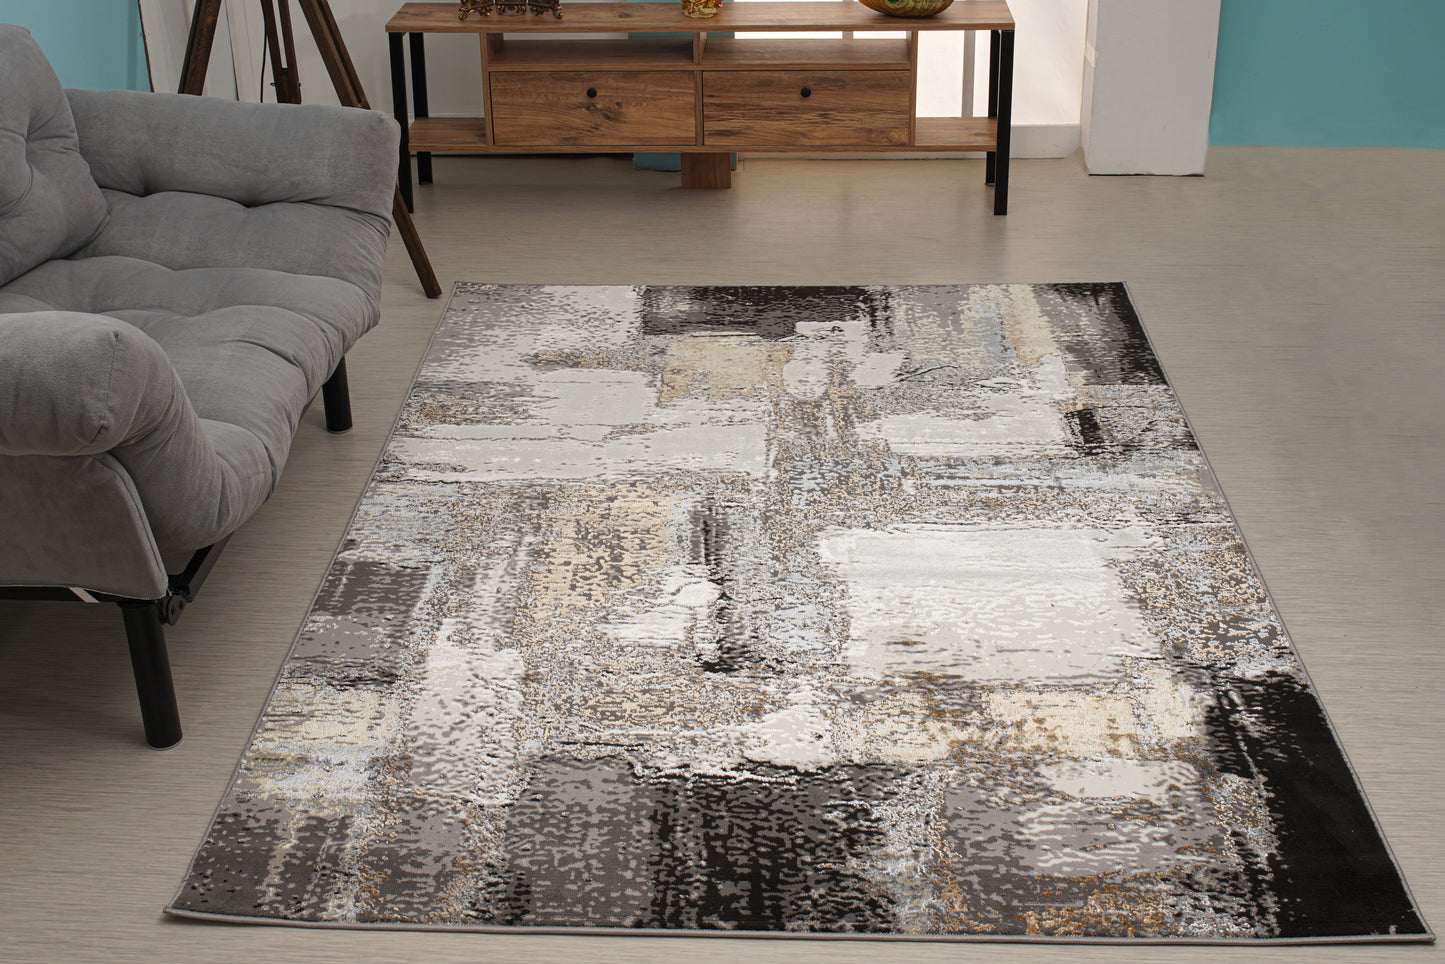 cream copper gold grey metalic rustic abstract patches pattern area rug 2x5, 3x5 Runner Rug, Entry Way, Entrance, Balcony, Bedside, Home Office, Table Top